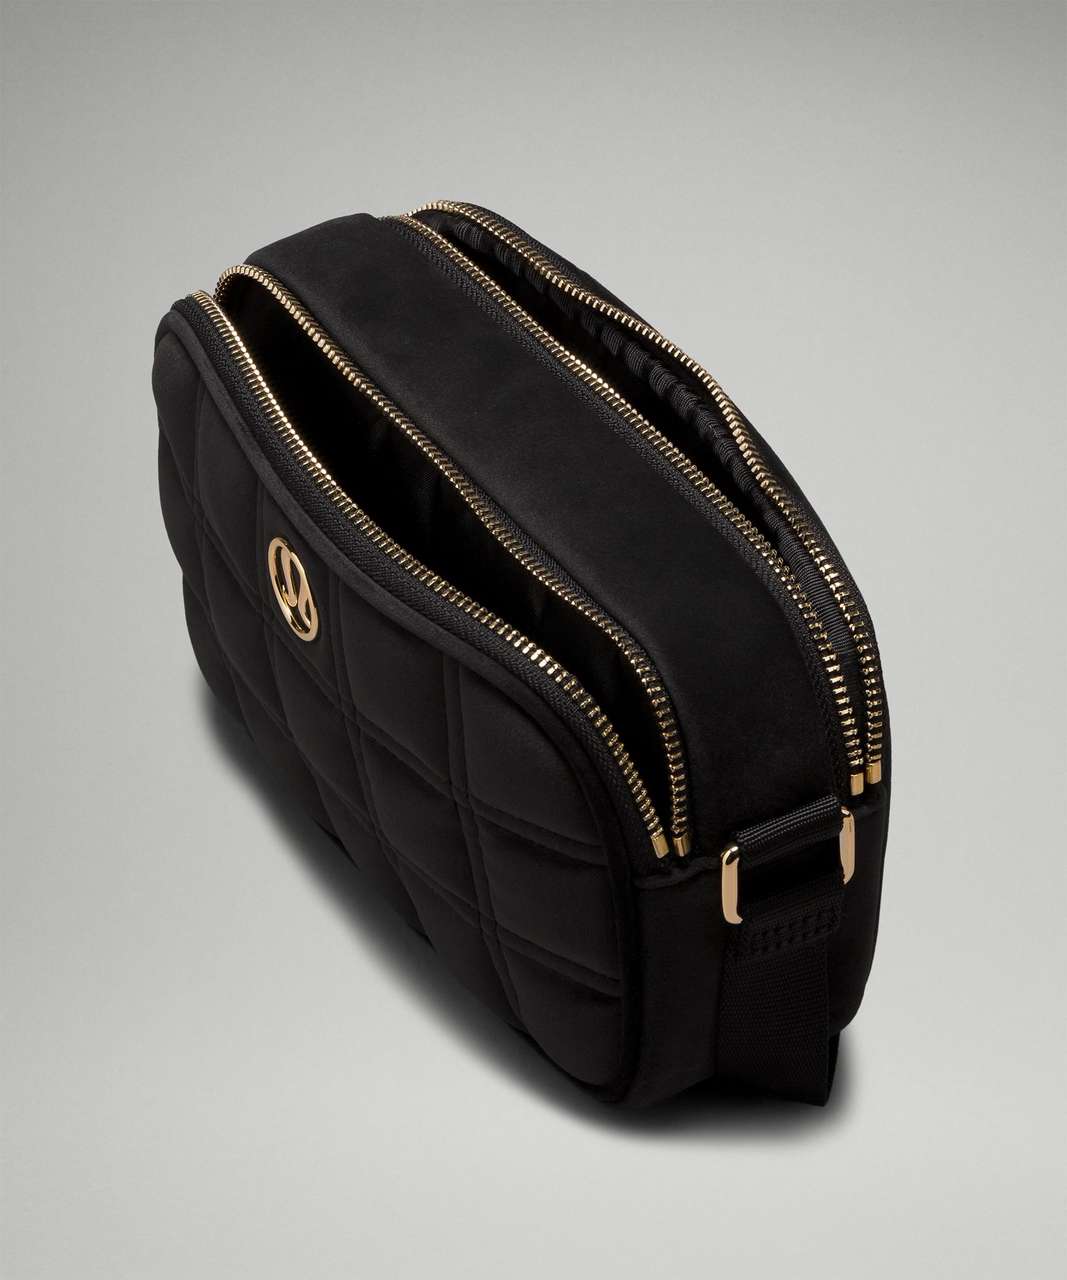 The Price of Lululemon's Quilted Velour Belt Bags Just Dropped